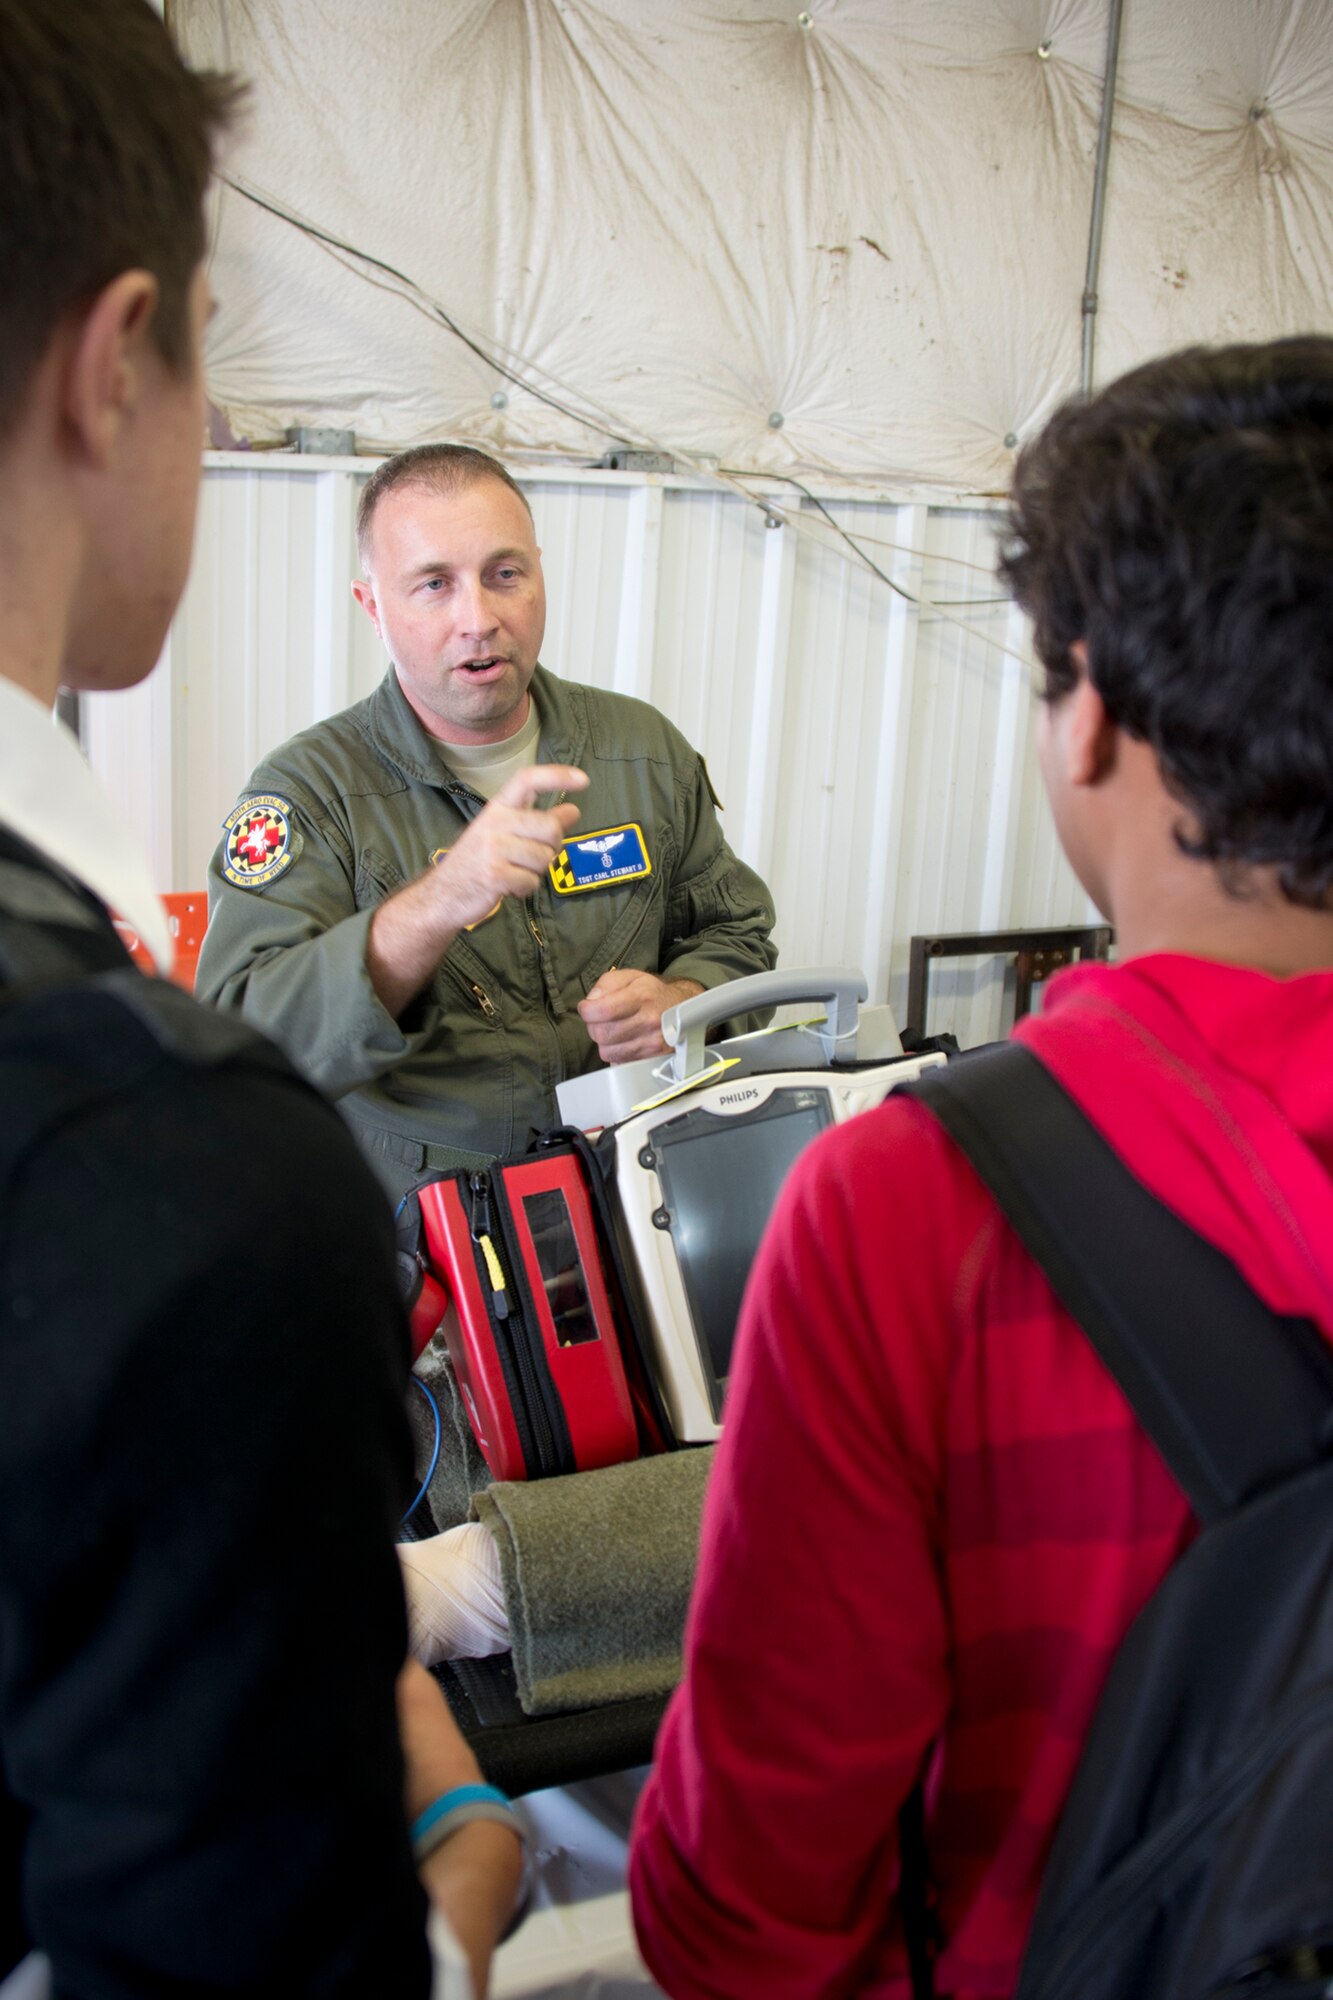 Tech Sgt. Carl Stewart II, 459th Aeromedical Evacuation Squadron aeromedical evacuation technician, inform a students about a career as an air transport medic at the 11th annual Virginia Department of Transportation Career Fair at Prince William County Fairgrounds Oct. 8, 2015. The event, which drew more than 1,300 students from the Prince William County area, provided an opportunity for youths to learn about careers in the transportation industry. The 459th was on hand to discuss potential career paths as pilots, boom operators and inflight medics. (U.S. Air Force photo by Staff Sgt. Kat Justen)